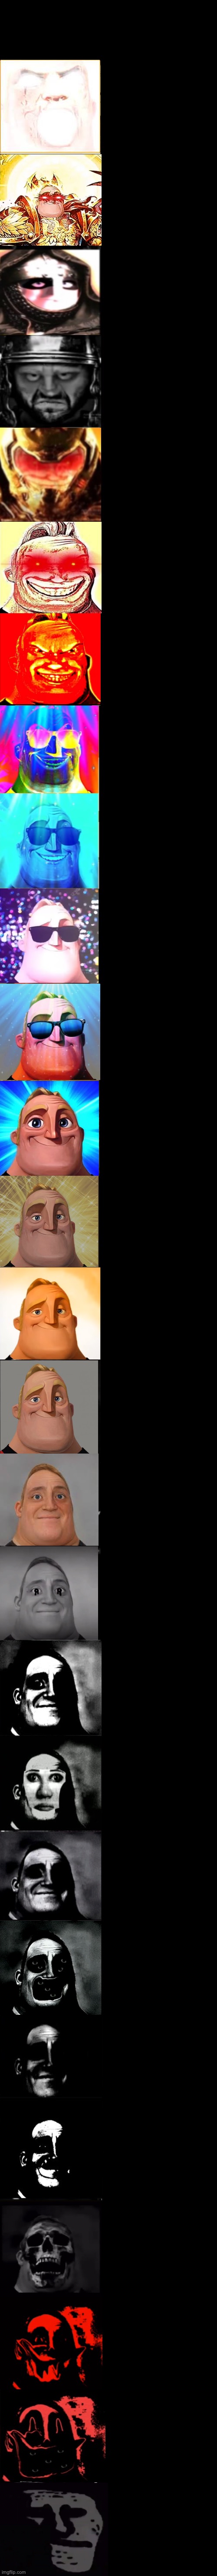 Mr Incredible Becoming Canny To Uncanny Extended Blank Meme Template